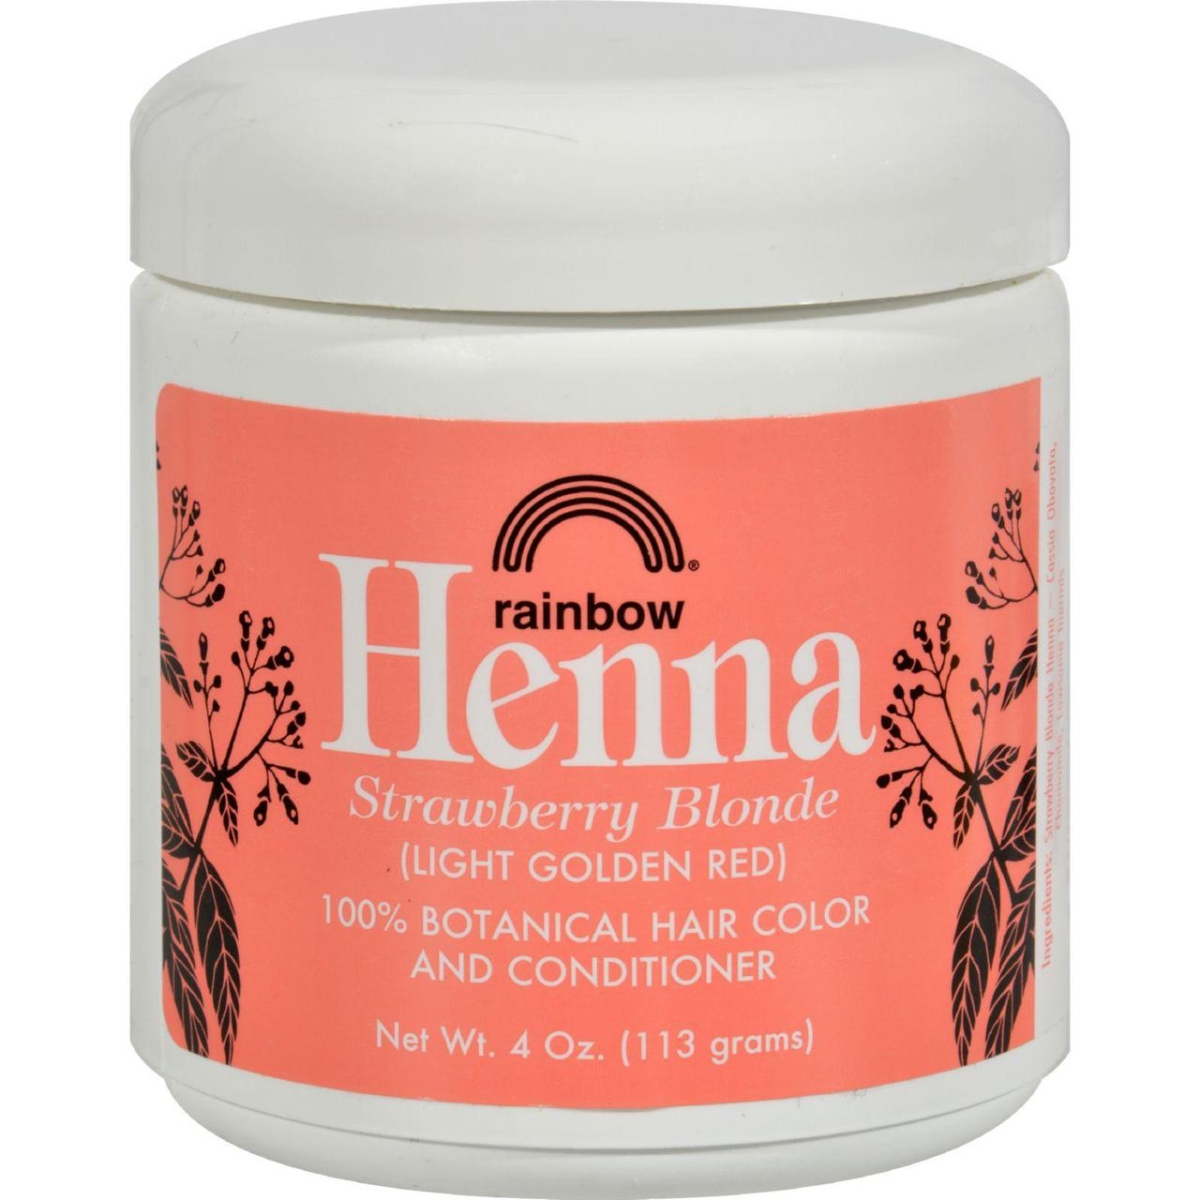 Hg0985903 4 Oz Henna Hair Color & Conditioner - Persian Strawberry